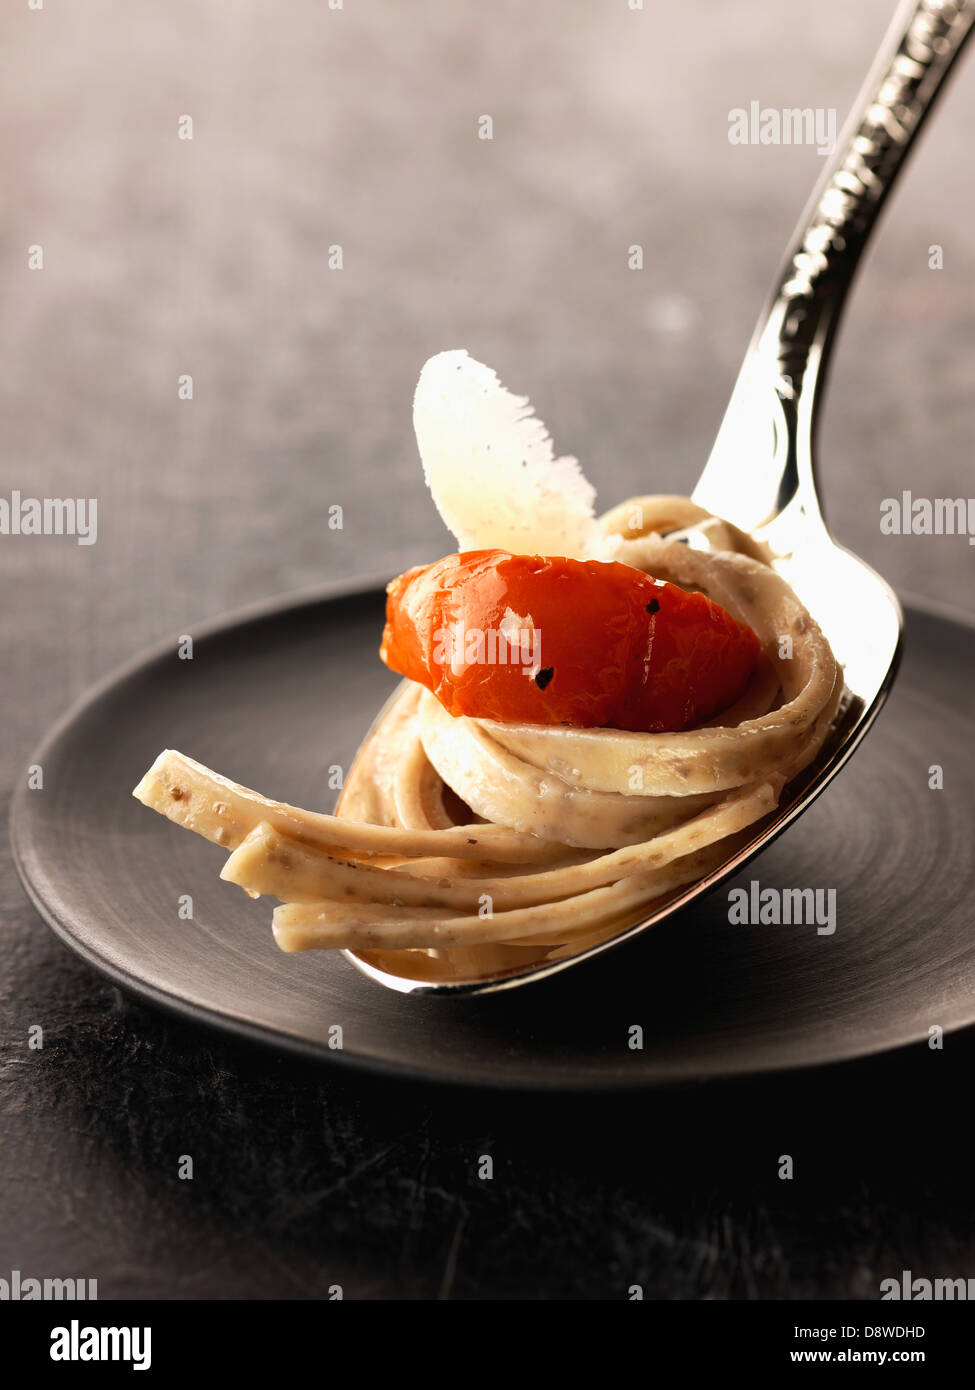 Pasta with tomatoes Stock Photo